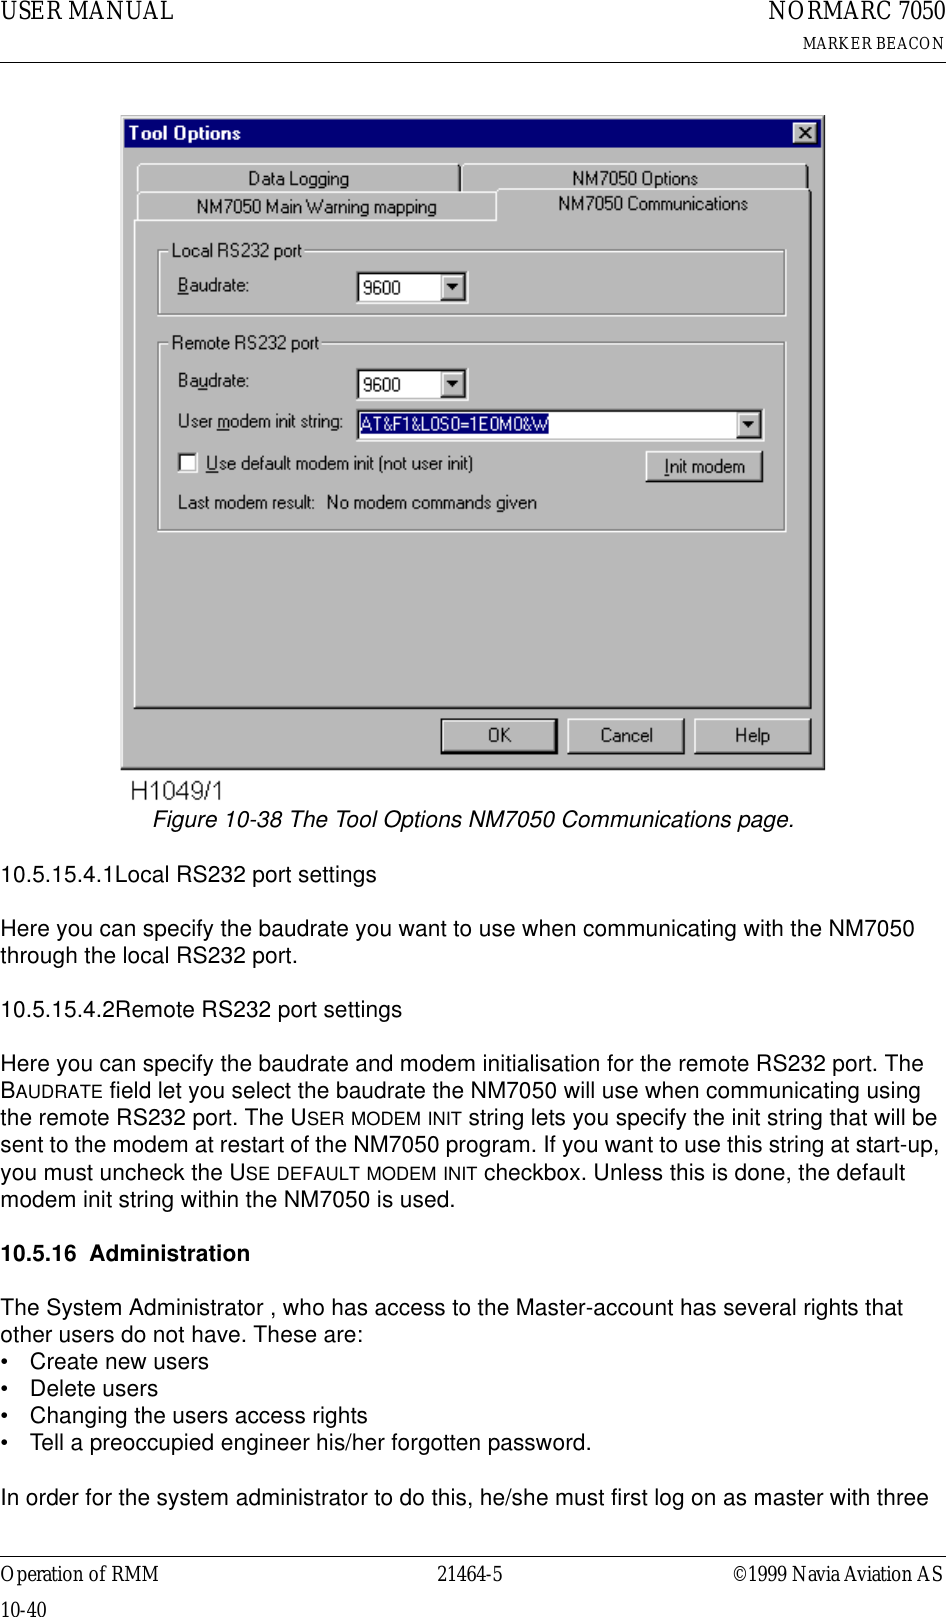 USER MANUAL10-4021464-5NORMARC 7050MARKER BEACONOperation of RMM ©1999 Navia Aviation ASFigure 10-38 The Tool Options NM7050 Communications page.10.5.15.4.1Local RS232 port settingsHere you can specify the baudrate you want to use when communicating with the NM7050 through the local RS232 port.10.5.15.4.2Remote RS232 port settingsHere you can specify the baudrate and modem initialisation for the remote RS232 port. The BAUDRATE field let you select the baudrate the NM7050 will use when communicating using the remote RS232 port. The USER MODEM INIT string lets you specify the init string that will be sent to the modem at restart of the NM7050 program. If you want to use this string at start-up, you must uncheck the USE DEFAULT MODEM INIT checkbox. Unless this is done, the default modem init string within the NM7050 is used.10.5.16 AdministrationThe System Administrator , who has access to the Master-account has several rights that other users do not have. These are:• Create new users• Delete users• Changing the users access rights• Tell a preoccupied engineer his/her forgotten password.In order for the system administrator to do this, he/she must first log on as master with three 